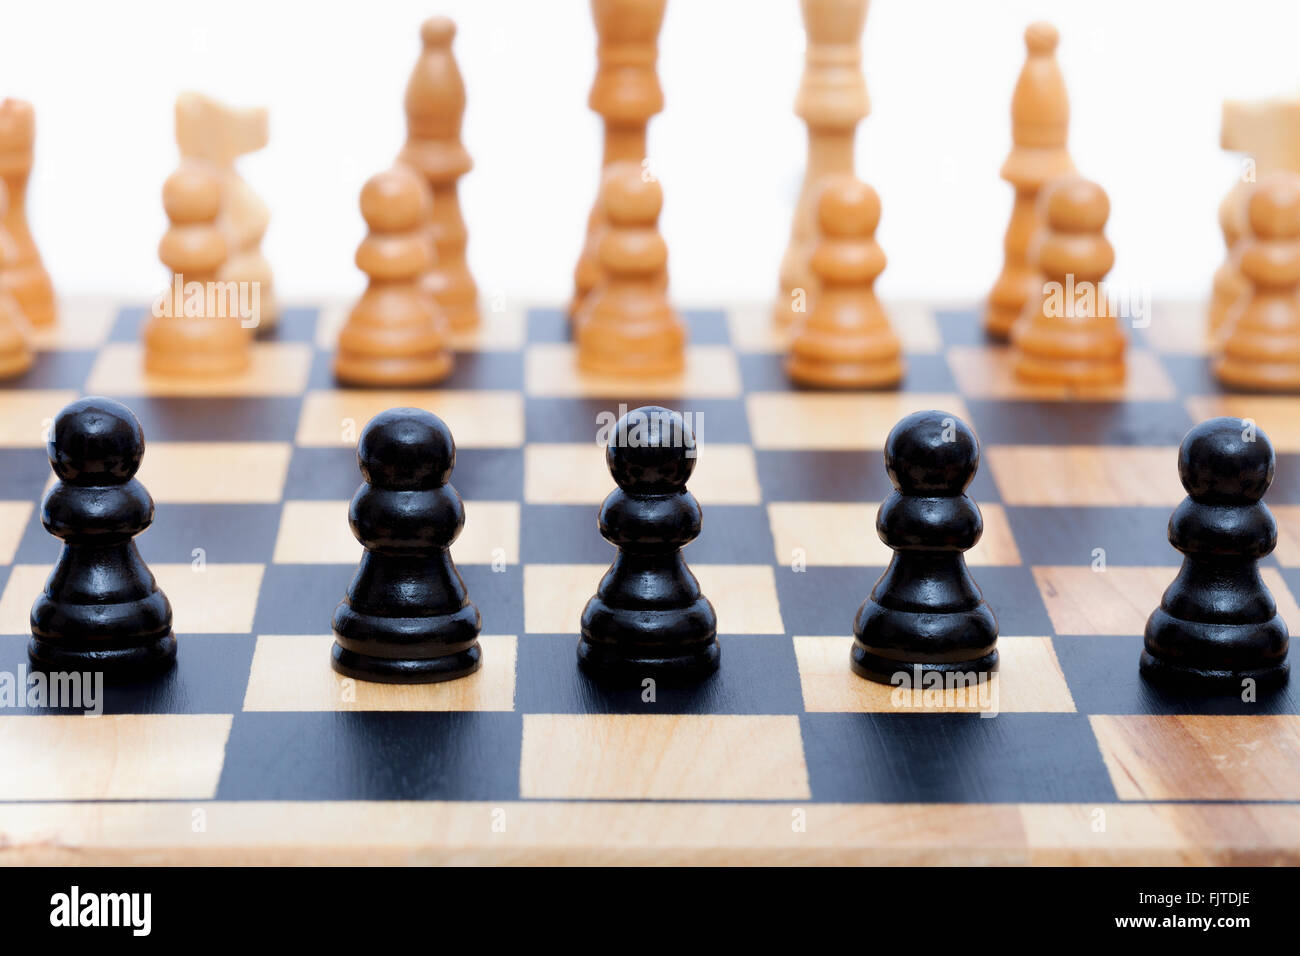 Chess board and chess pieces Stock Photo